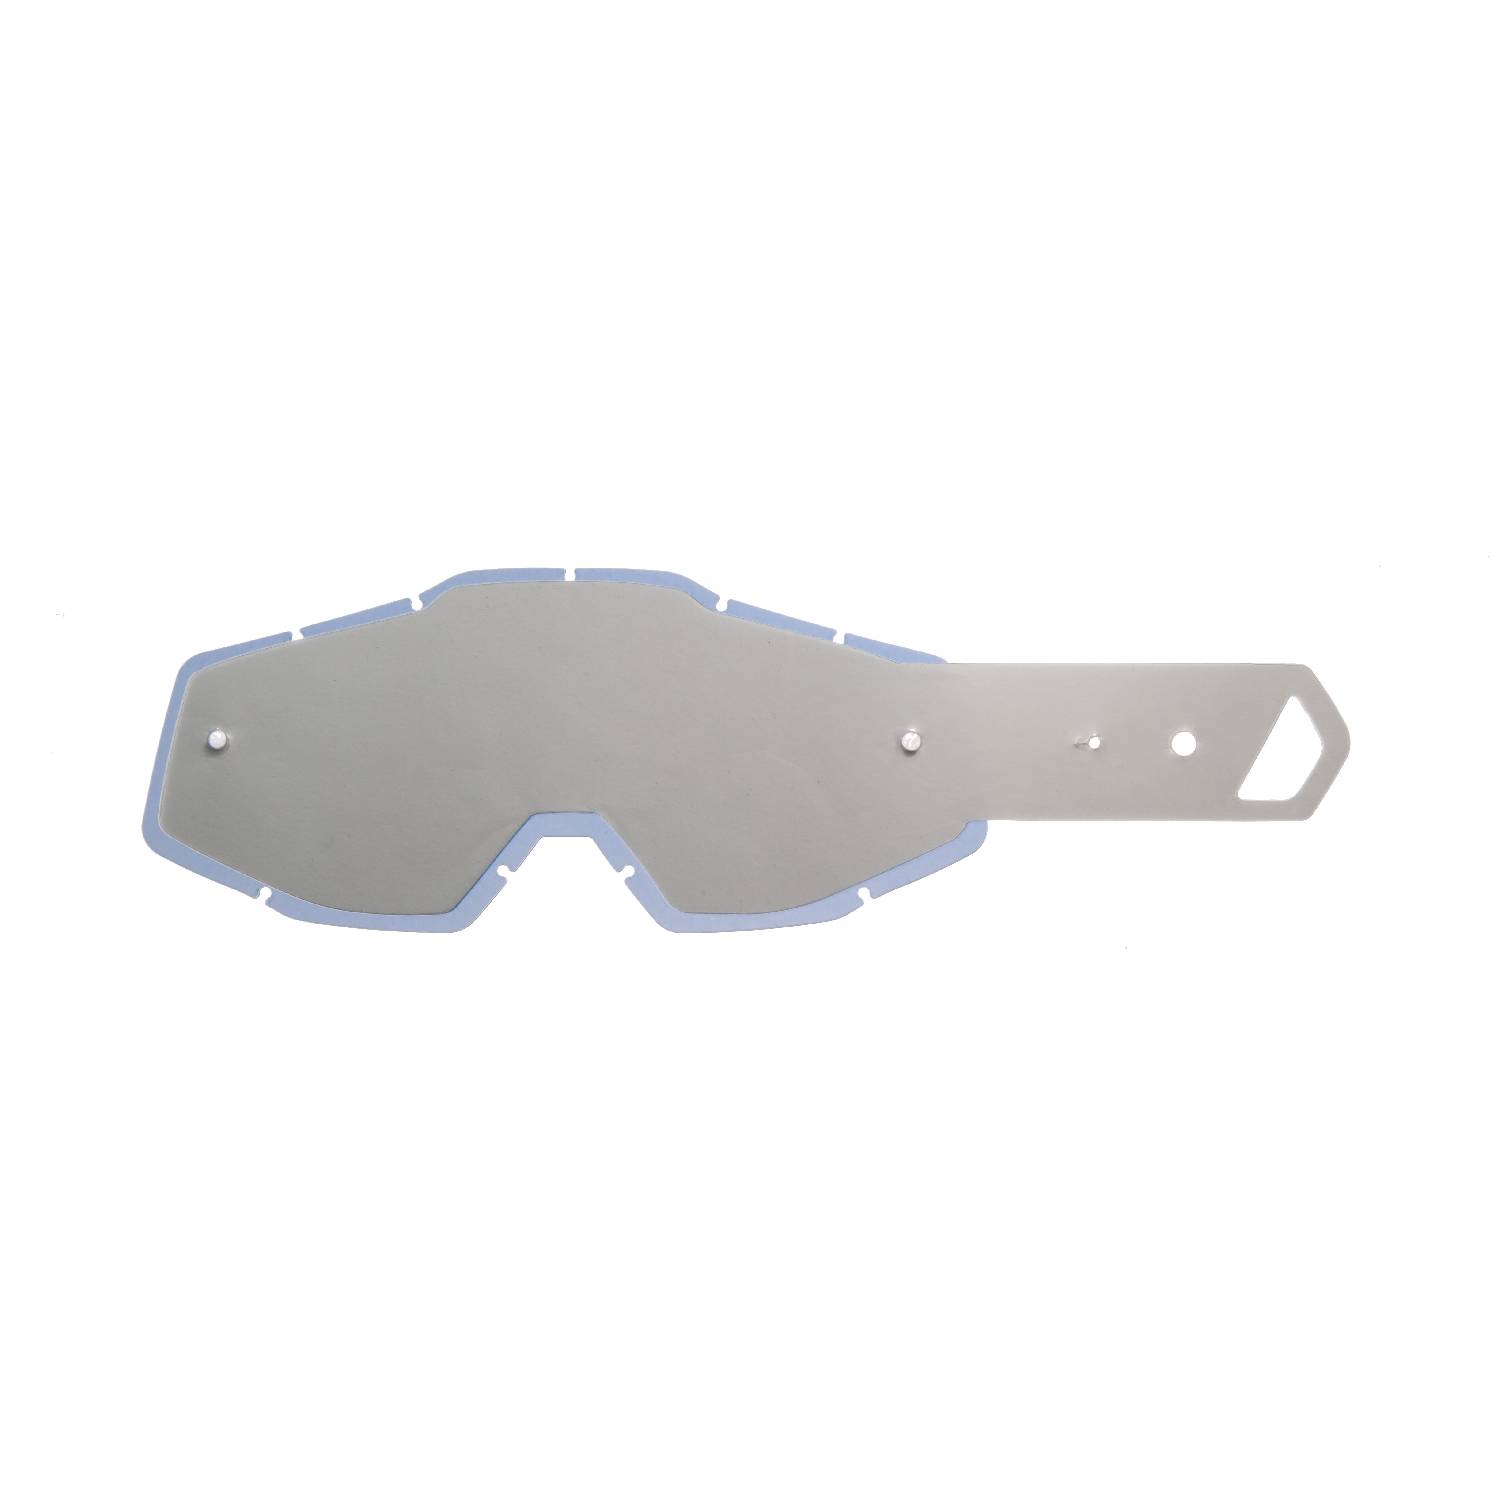 combo lenses with smokey lenses with 10 tear off compatible for POWERBOMB/POWERCORE goggle